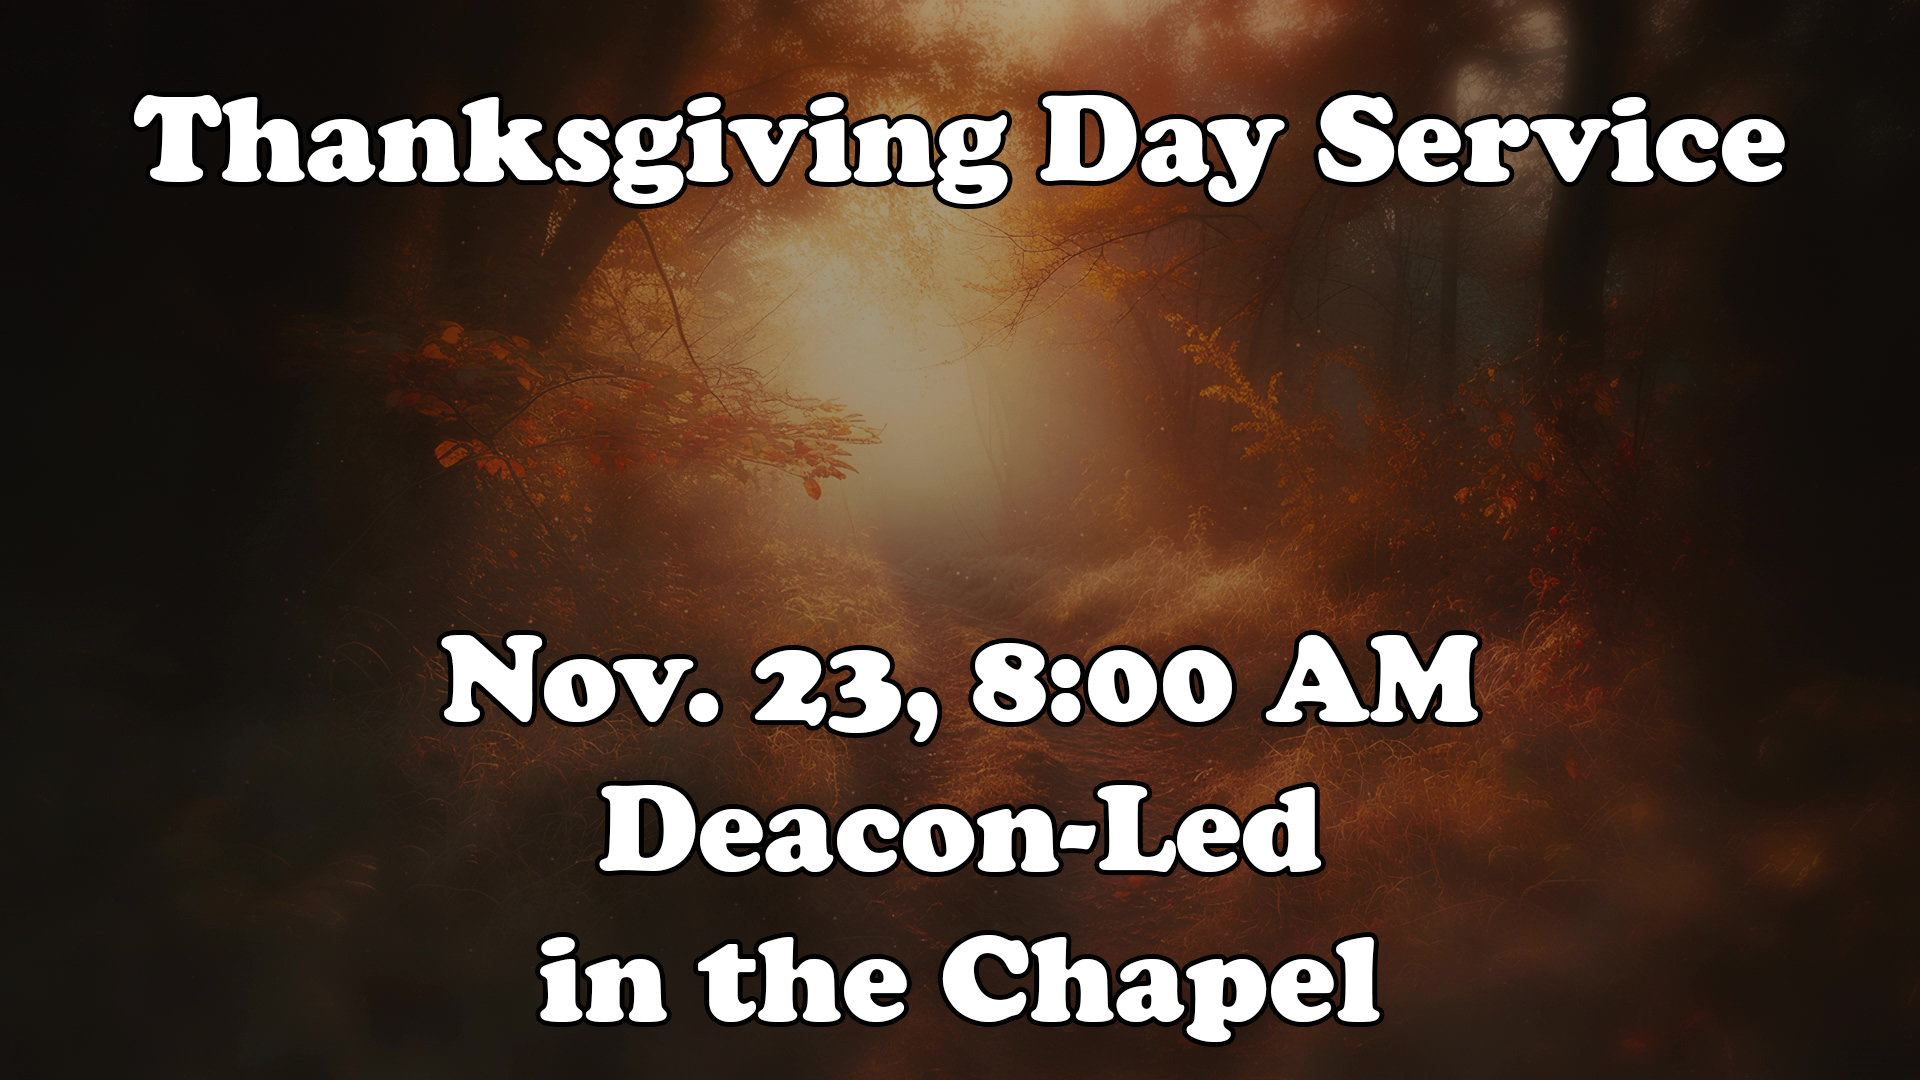 There will be an 8 AM service on Thanksgiving in the Chapel - Fee Fee Baptist Church